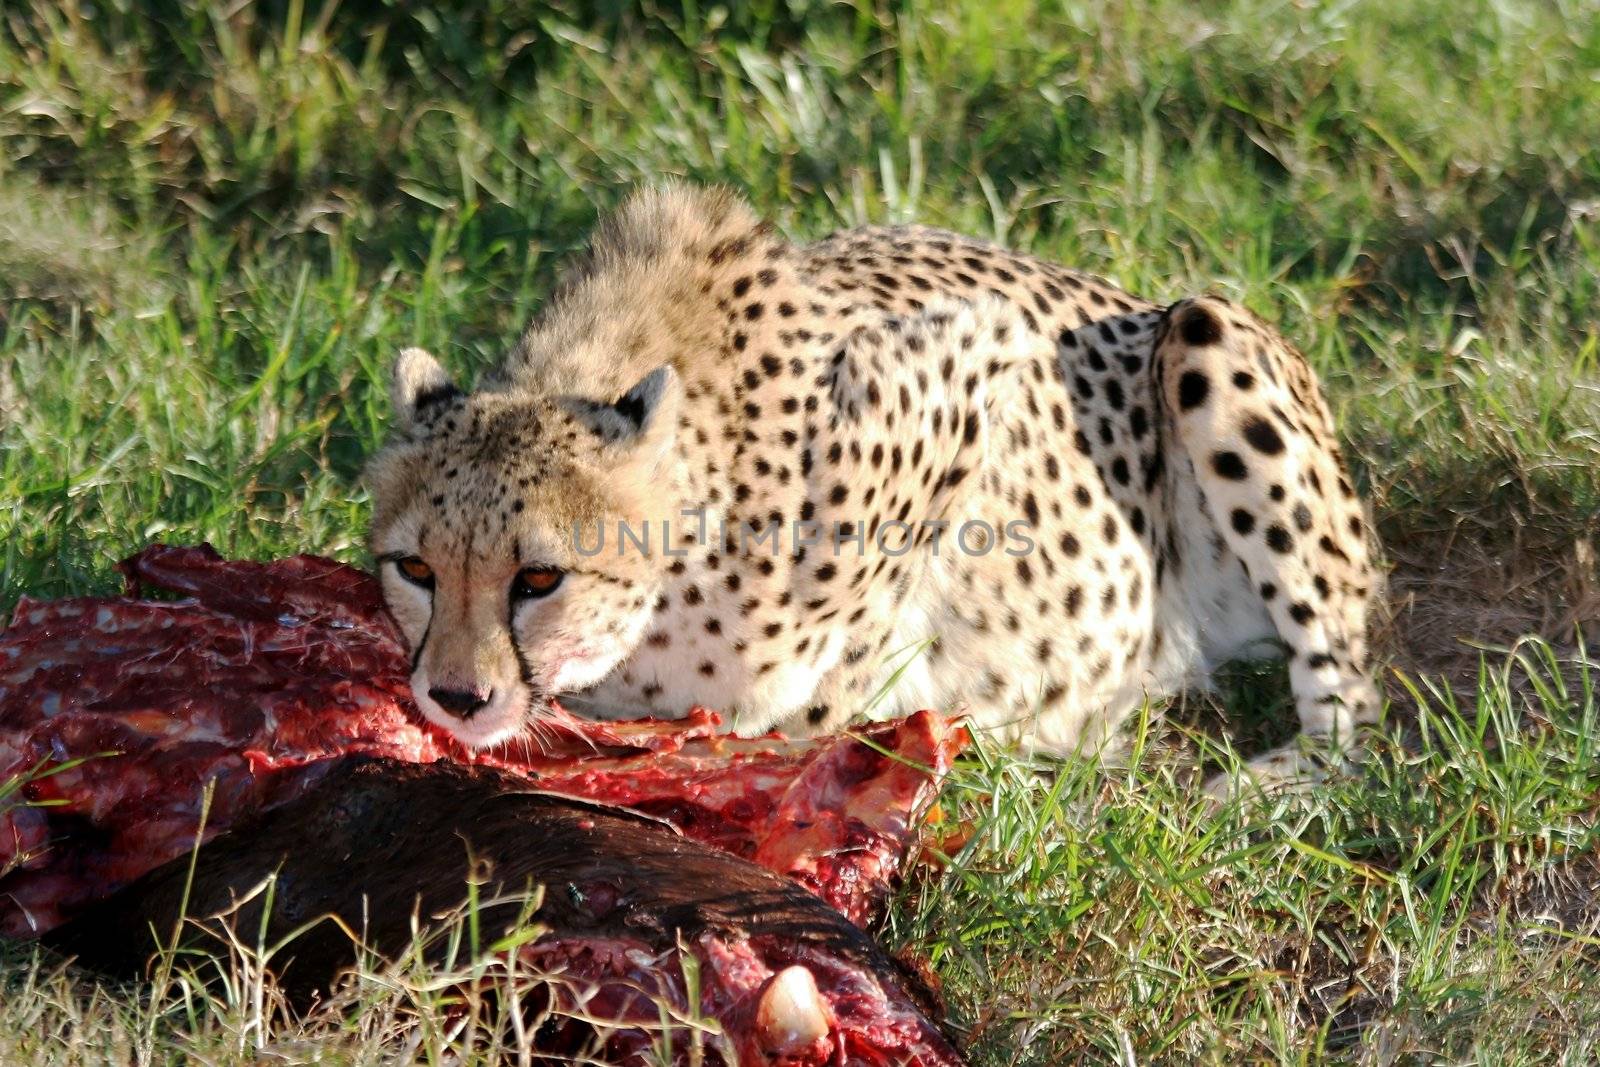 Cheetah from Africa eating from it's kill